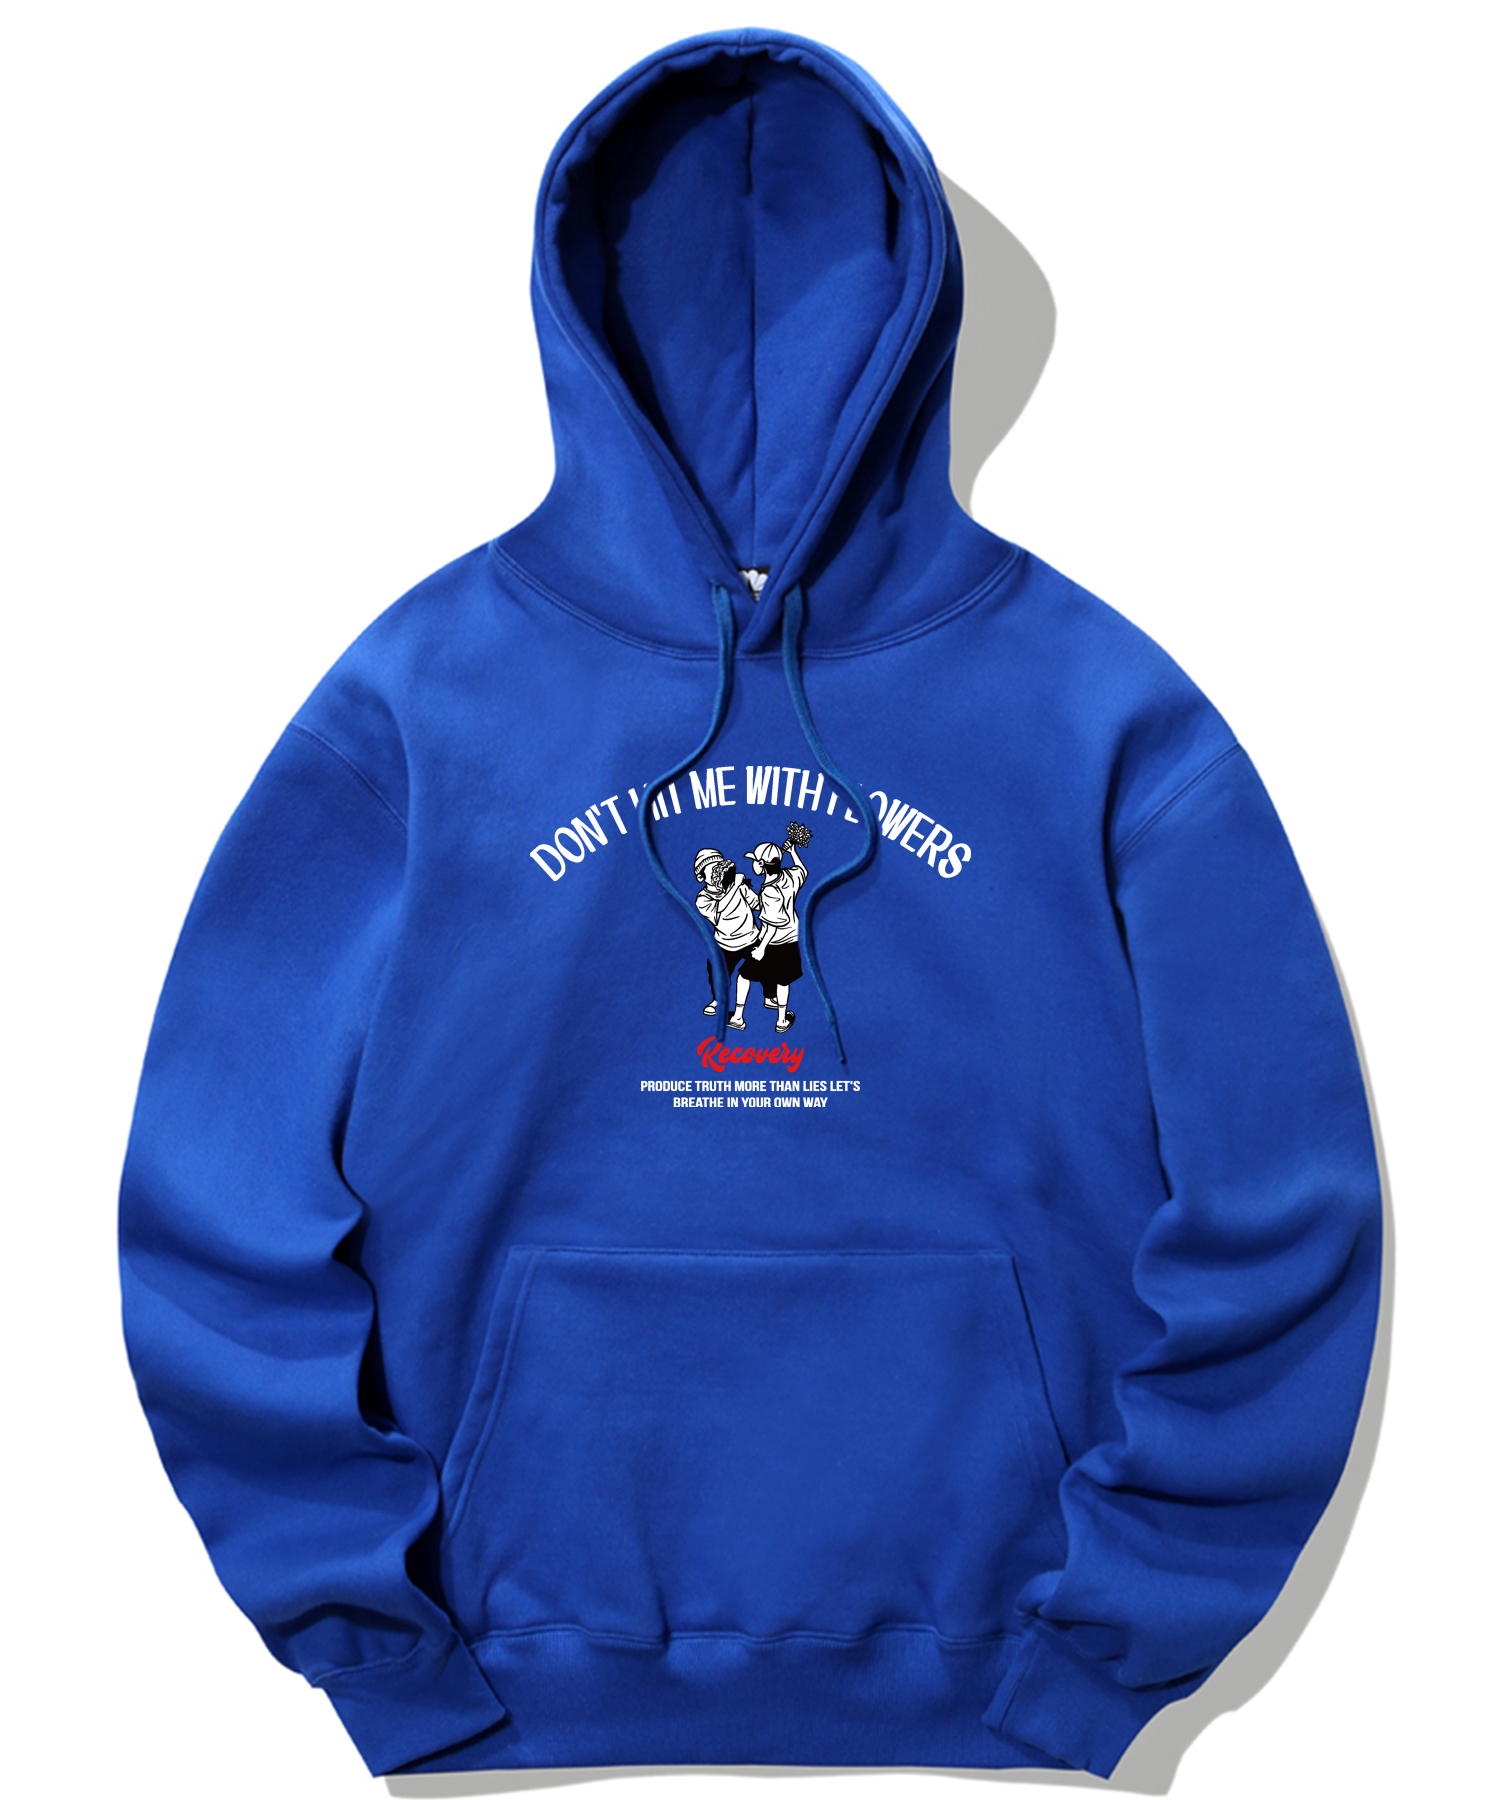 DON’T HIT ME WITH FLOWERS GRAPHIC HOODIE - BLUE